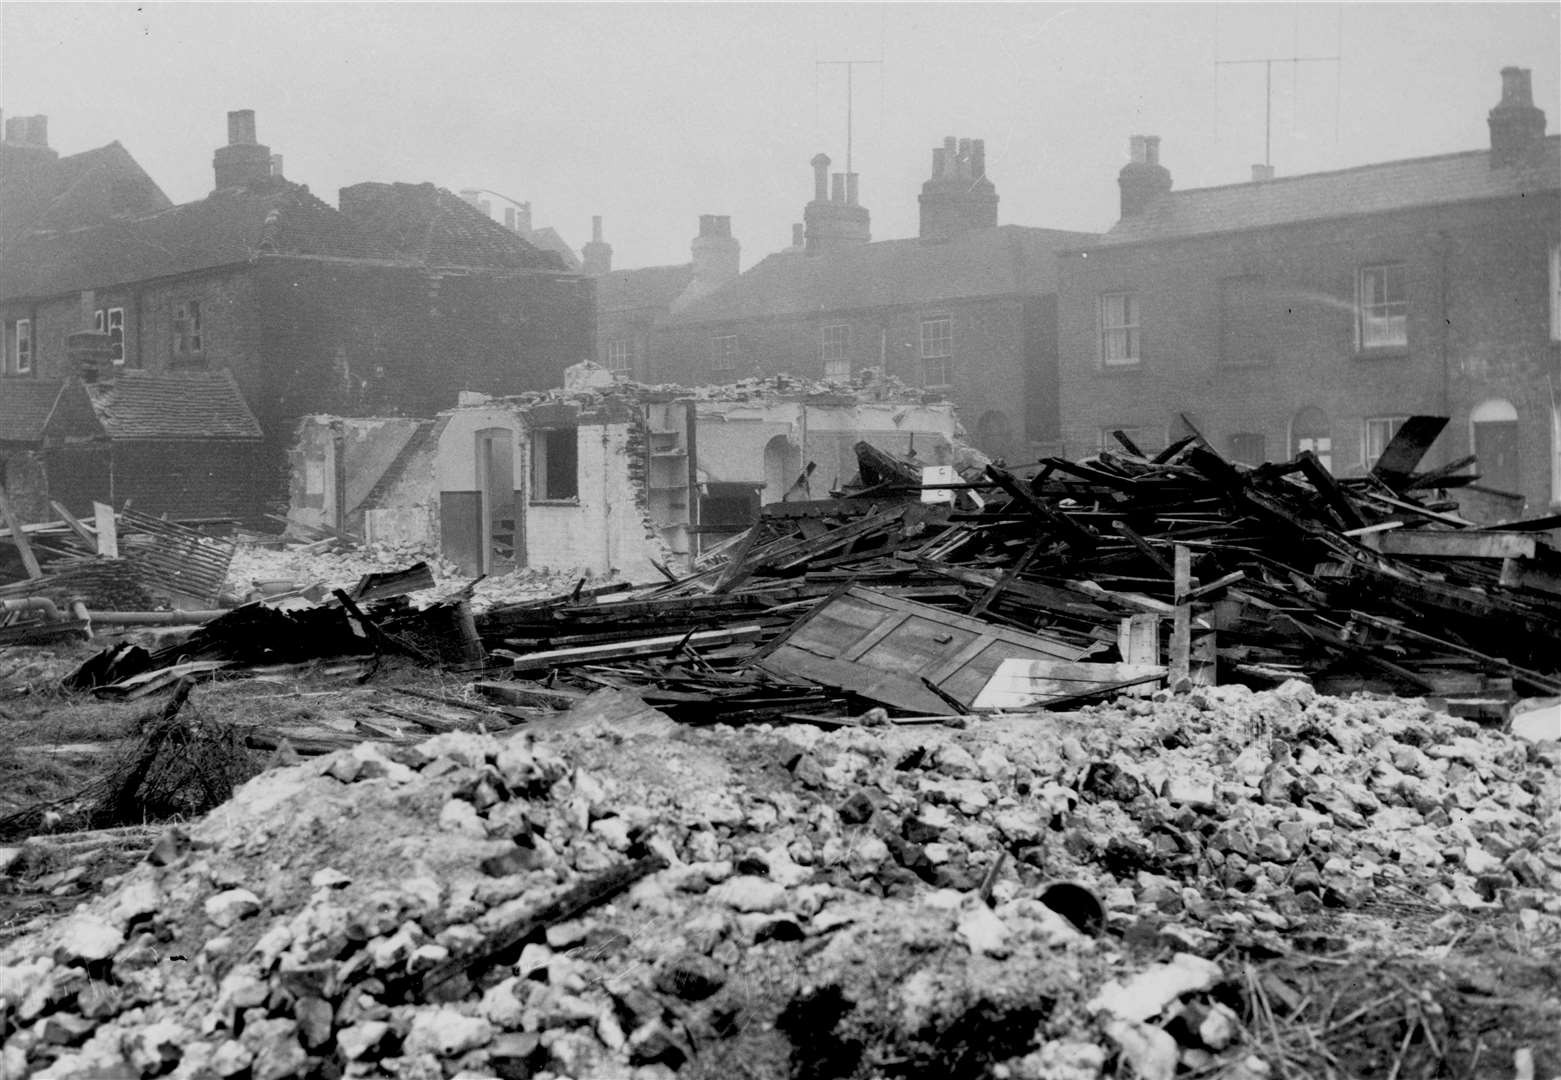 'Sub-standard' property in Union Street, Canterbury, was torn down in February 1959 as part of the city council's largest slum clearance scheme